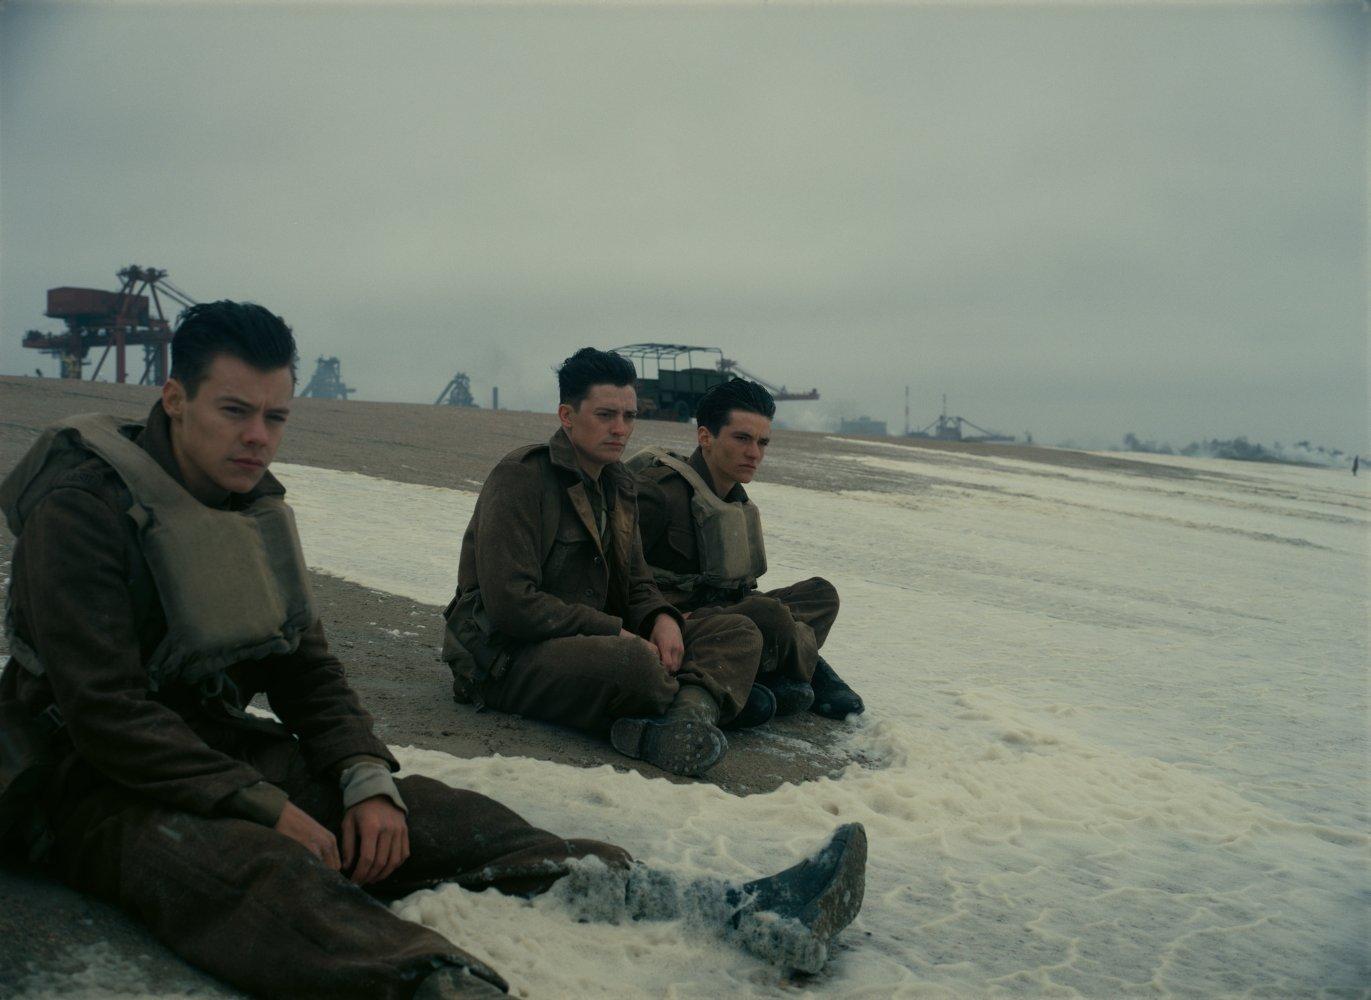 Review: ‘Dunkirk’ Is a Tour de Force War Movie, Both Sweeping and ...